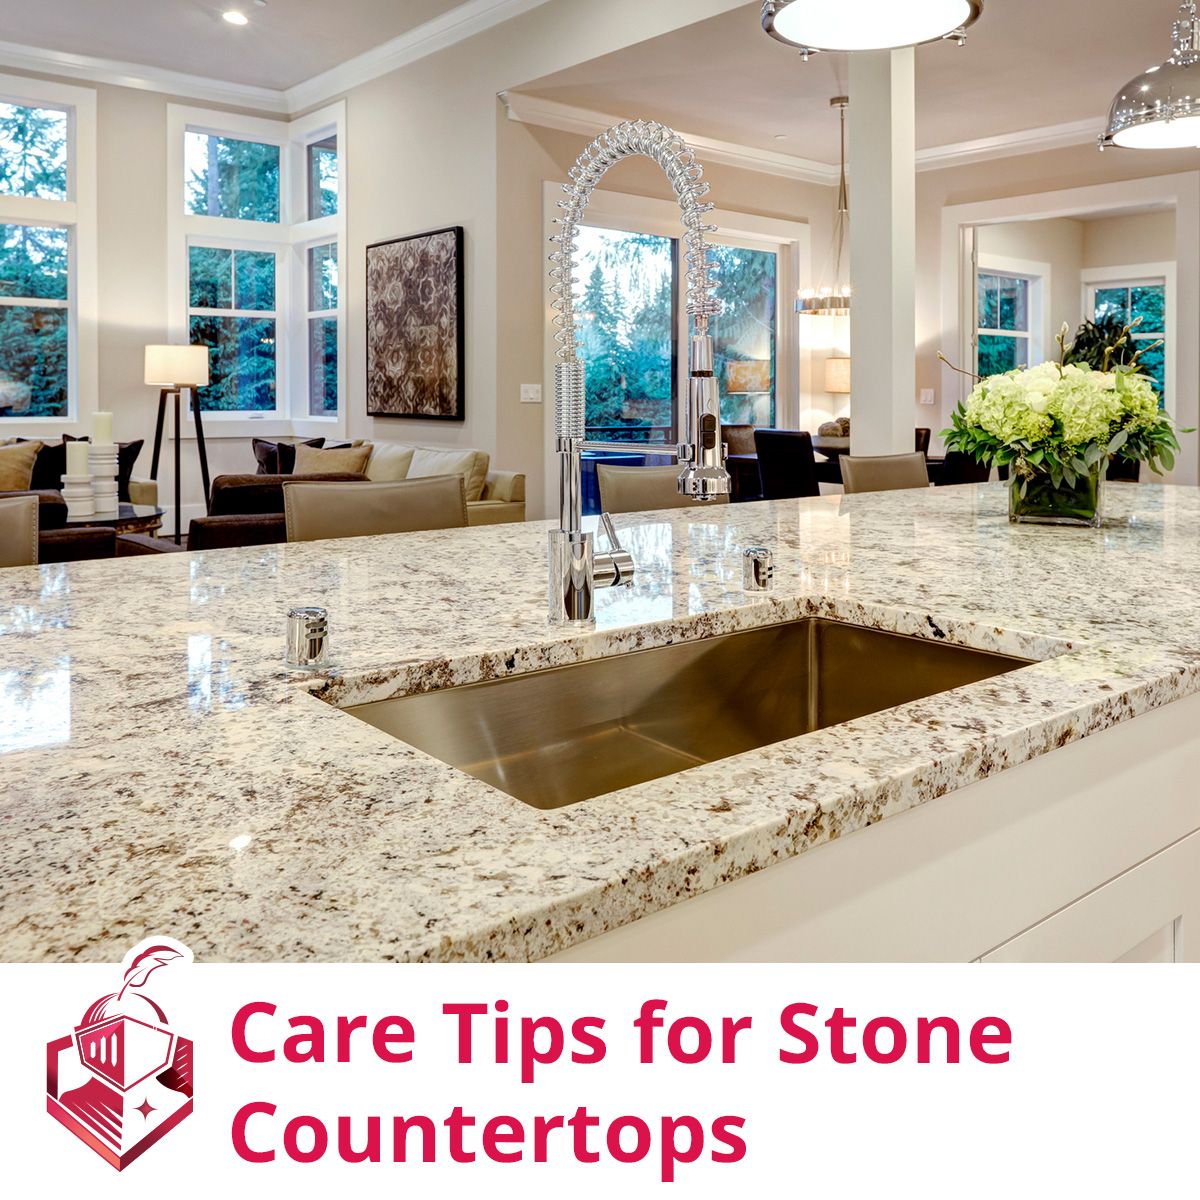 Care Tips for Stone Countertops